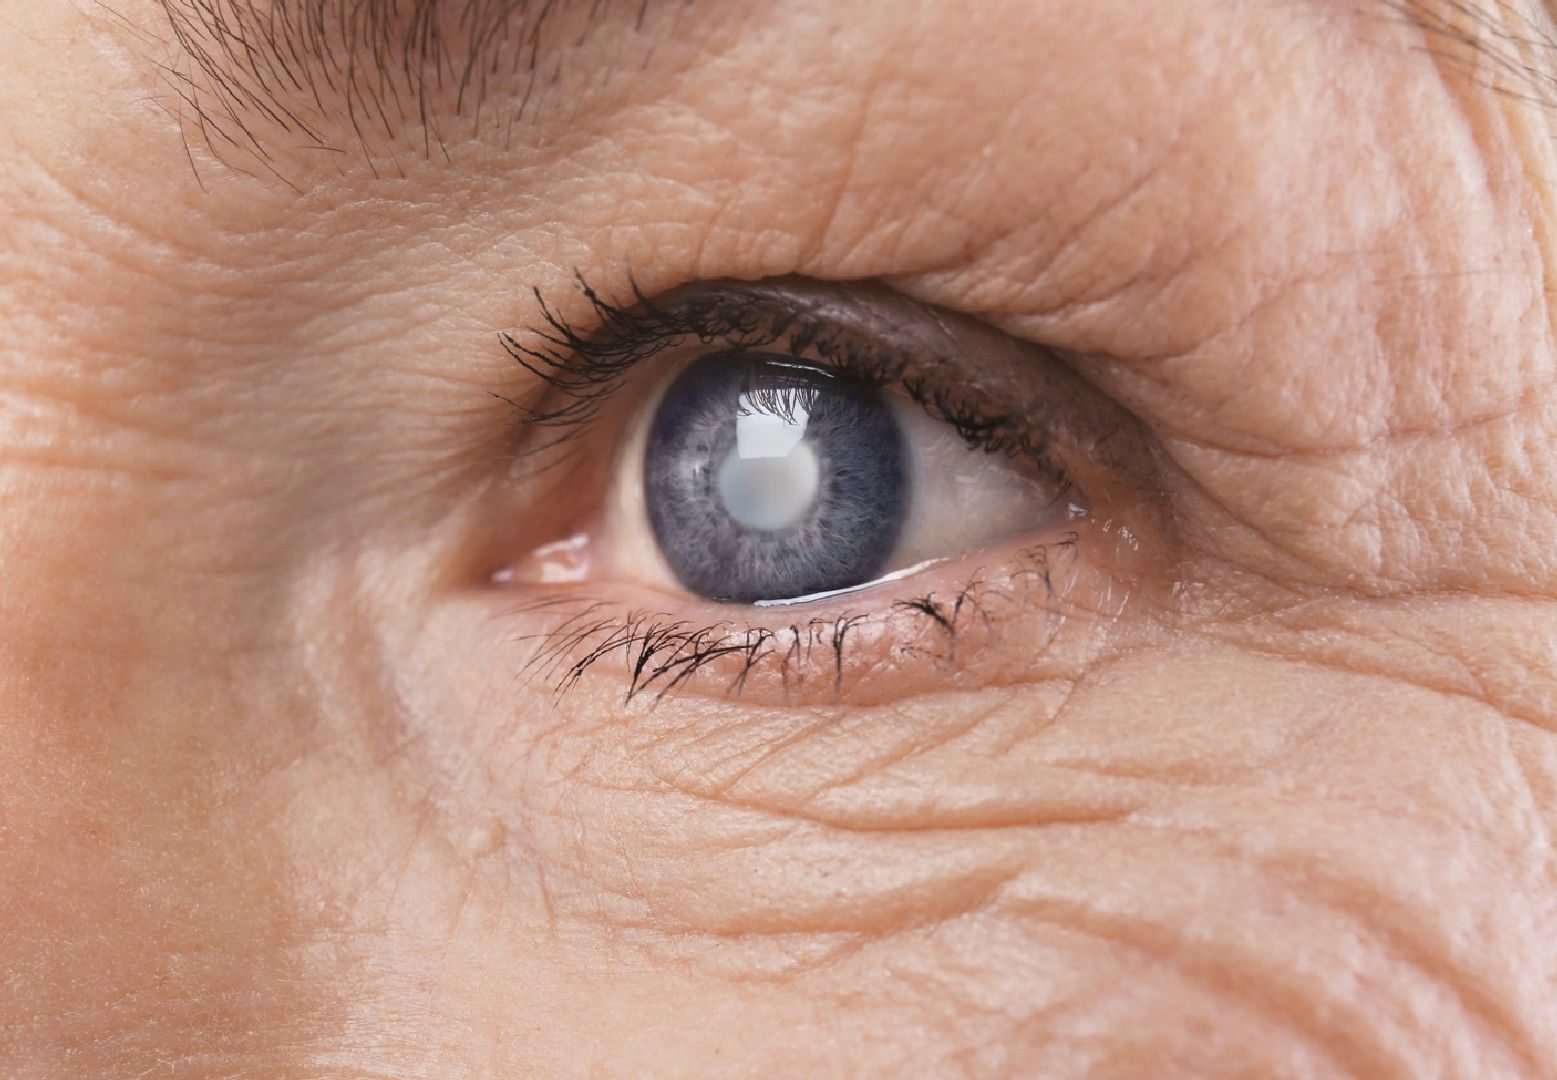 Cataract Surgery - Getting Rid Of The Mist From The Cataract